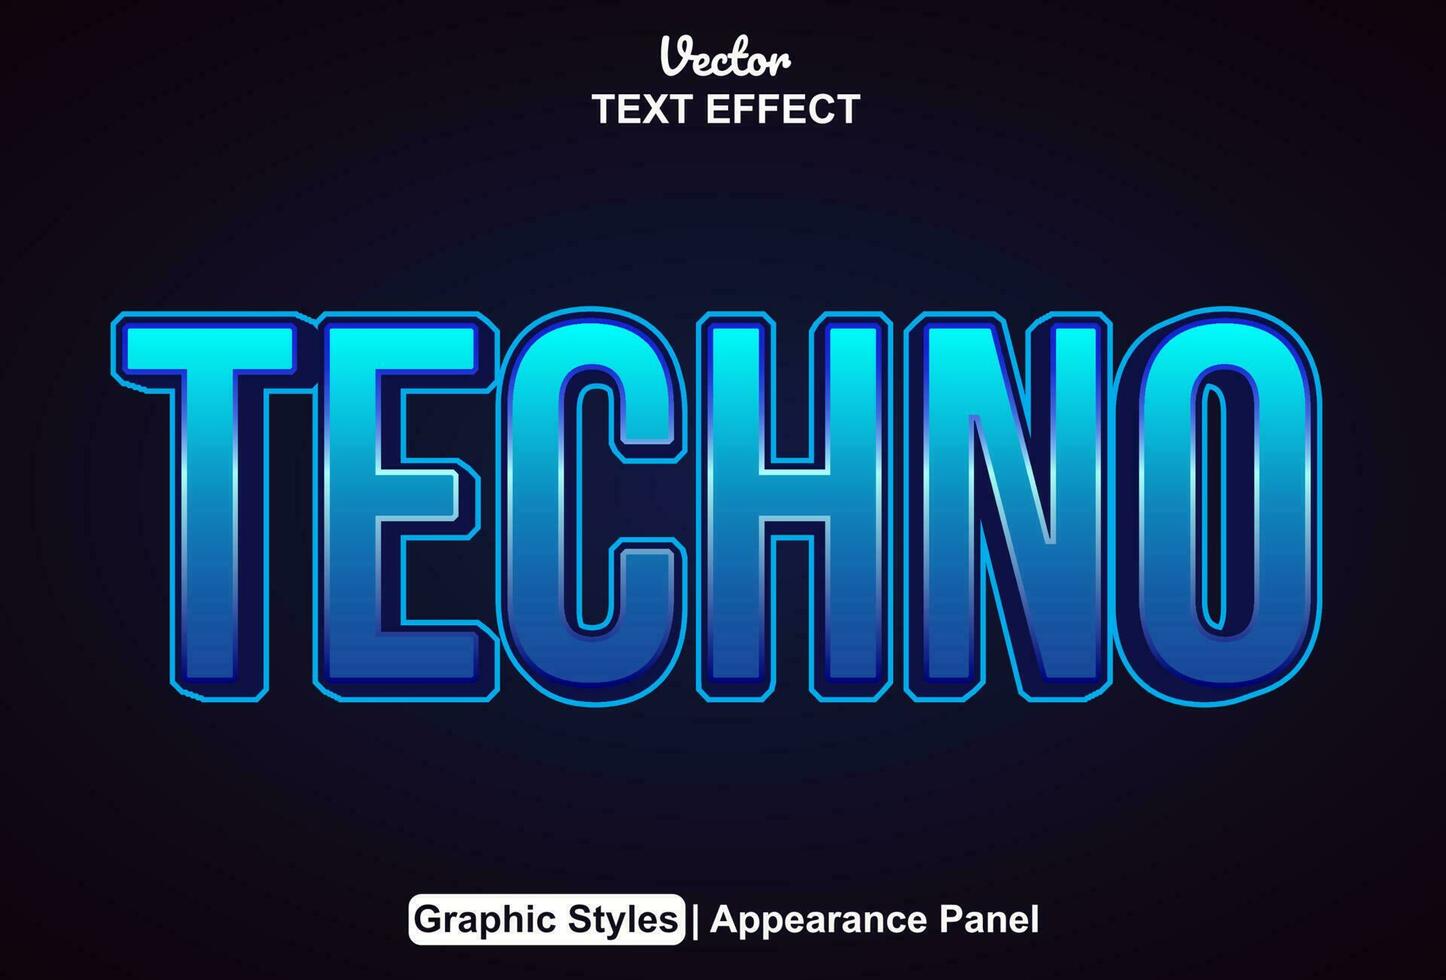 techno text effect with blue color graphic style editable. vector